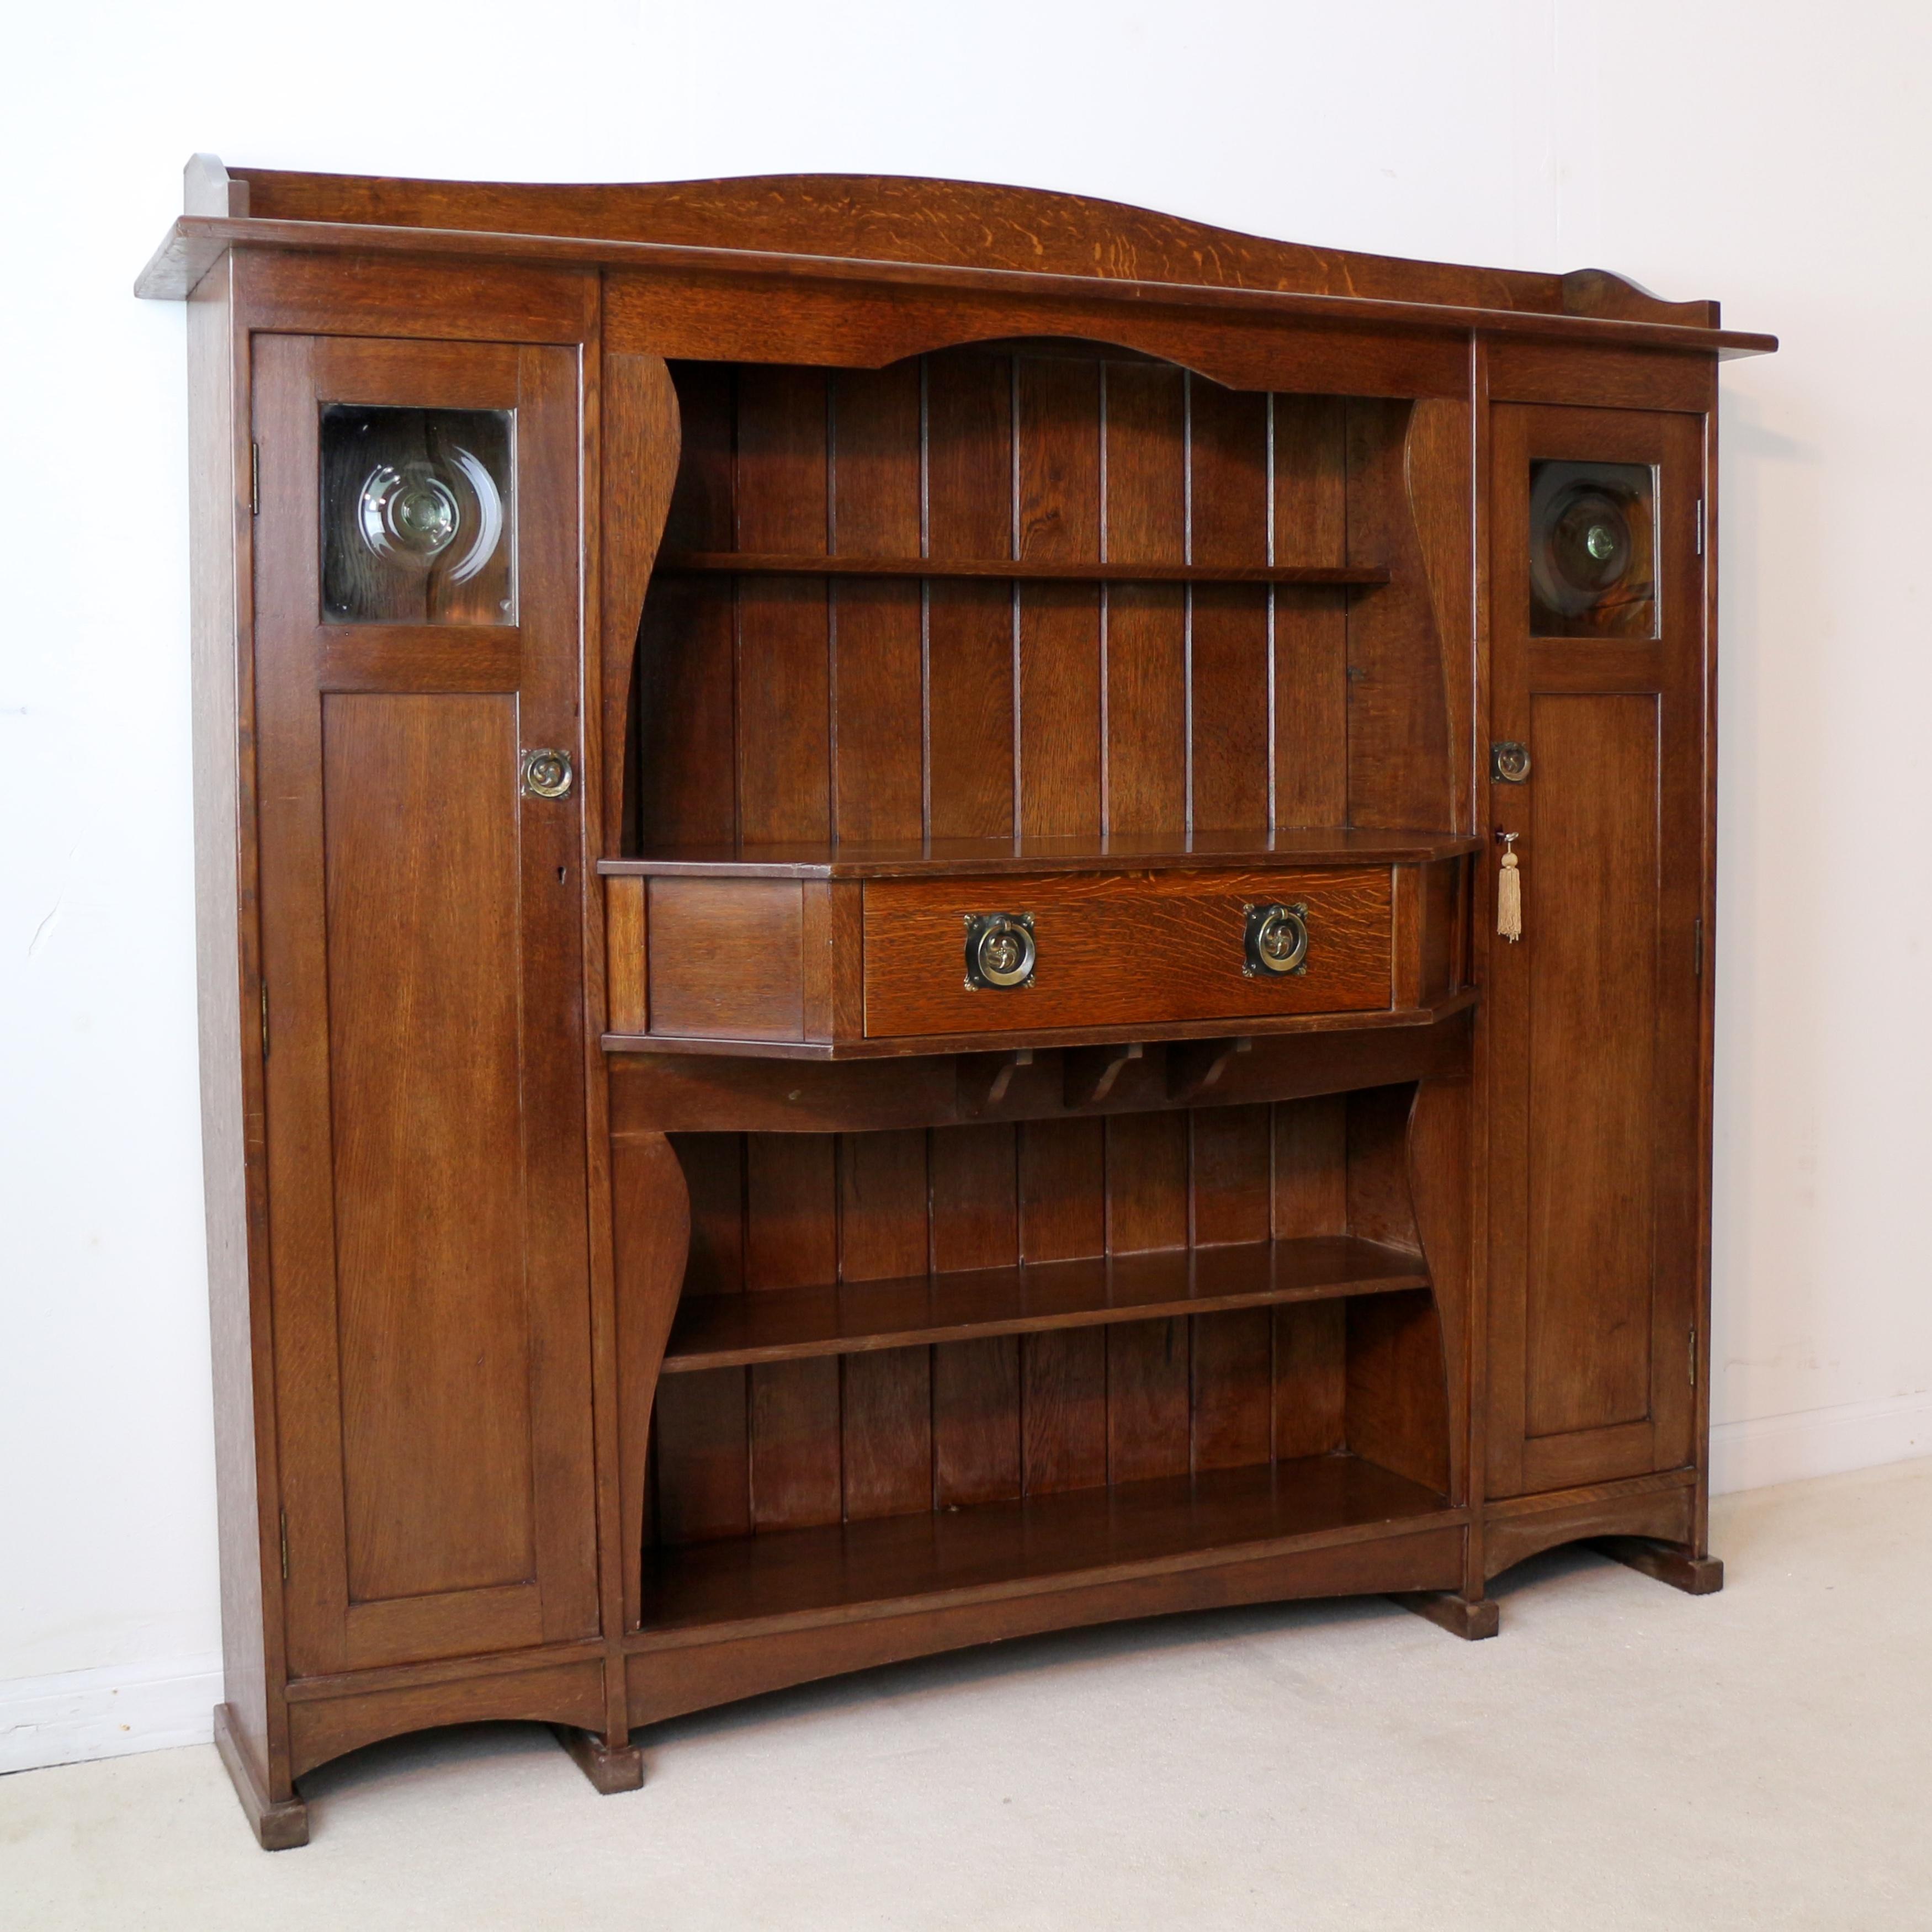 A handsome Arts & Crafts oak ‘Hathaway’ design sideboard or dresser by Liberty & Co of London. This sought after dresser was designed by the celebrated Leonard Wyburd for Liberty's circa 1900. Featuring a raised and shaped gallery back above an